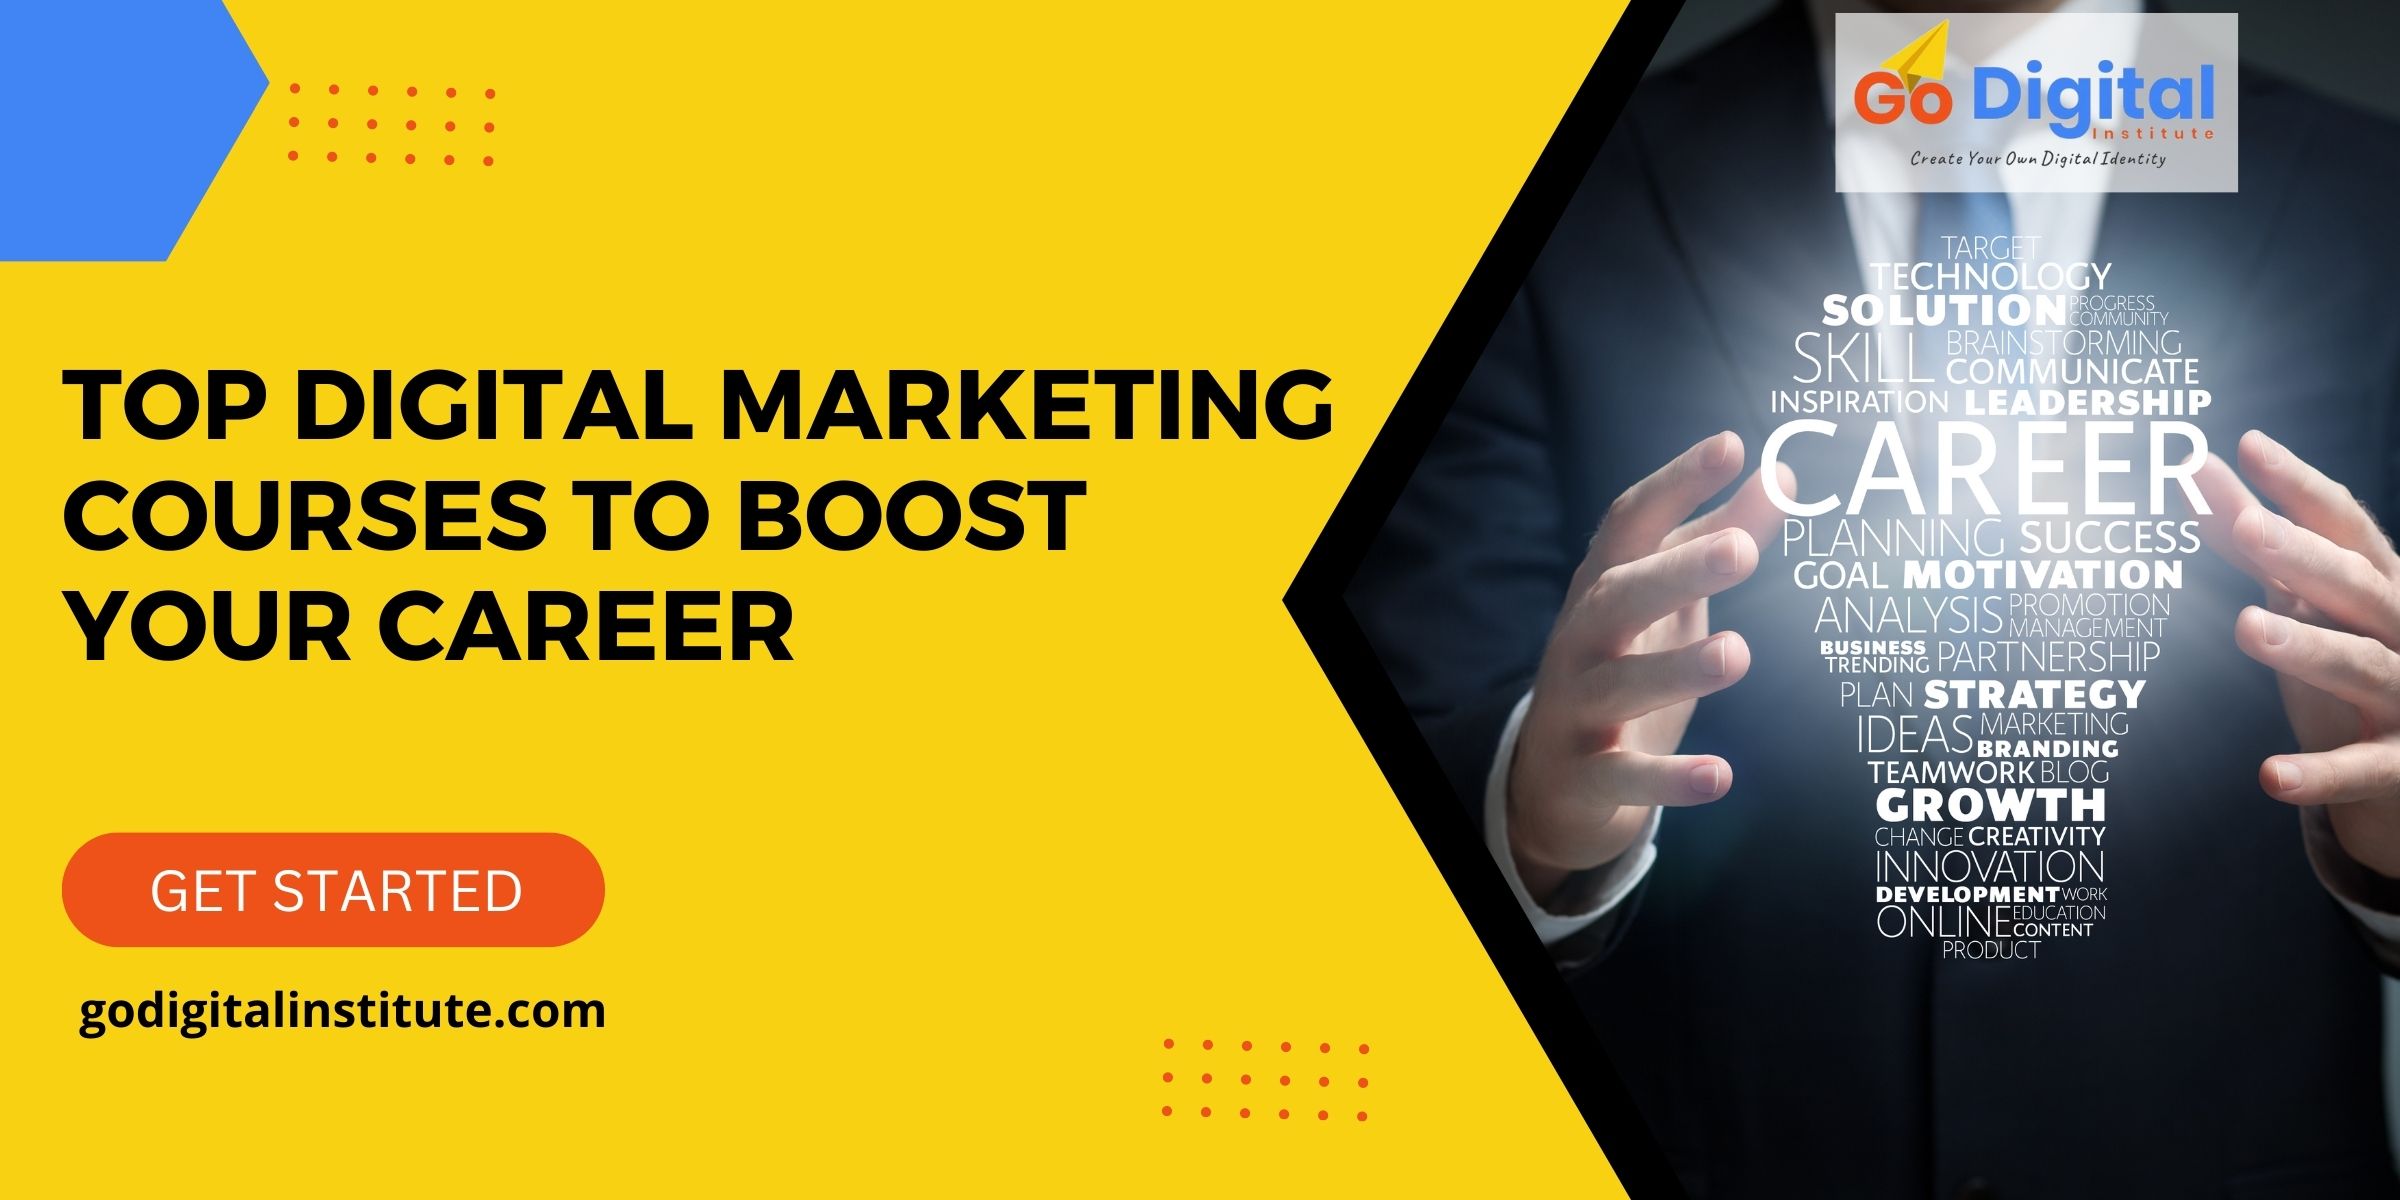 Top Digital Marketing Courses to Boost Your Career